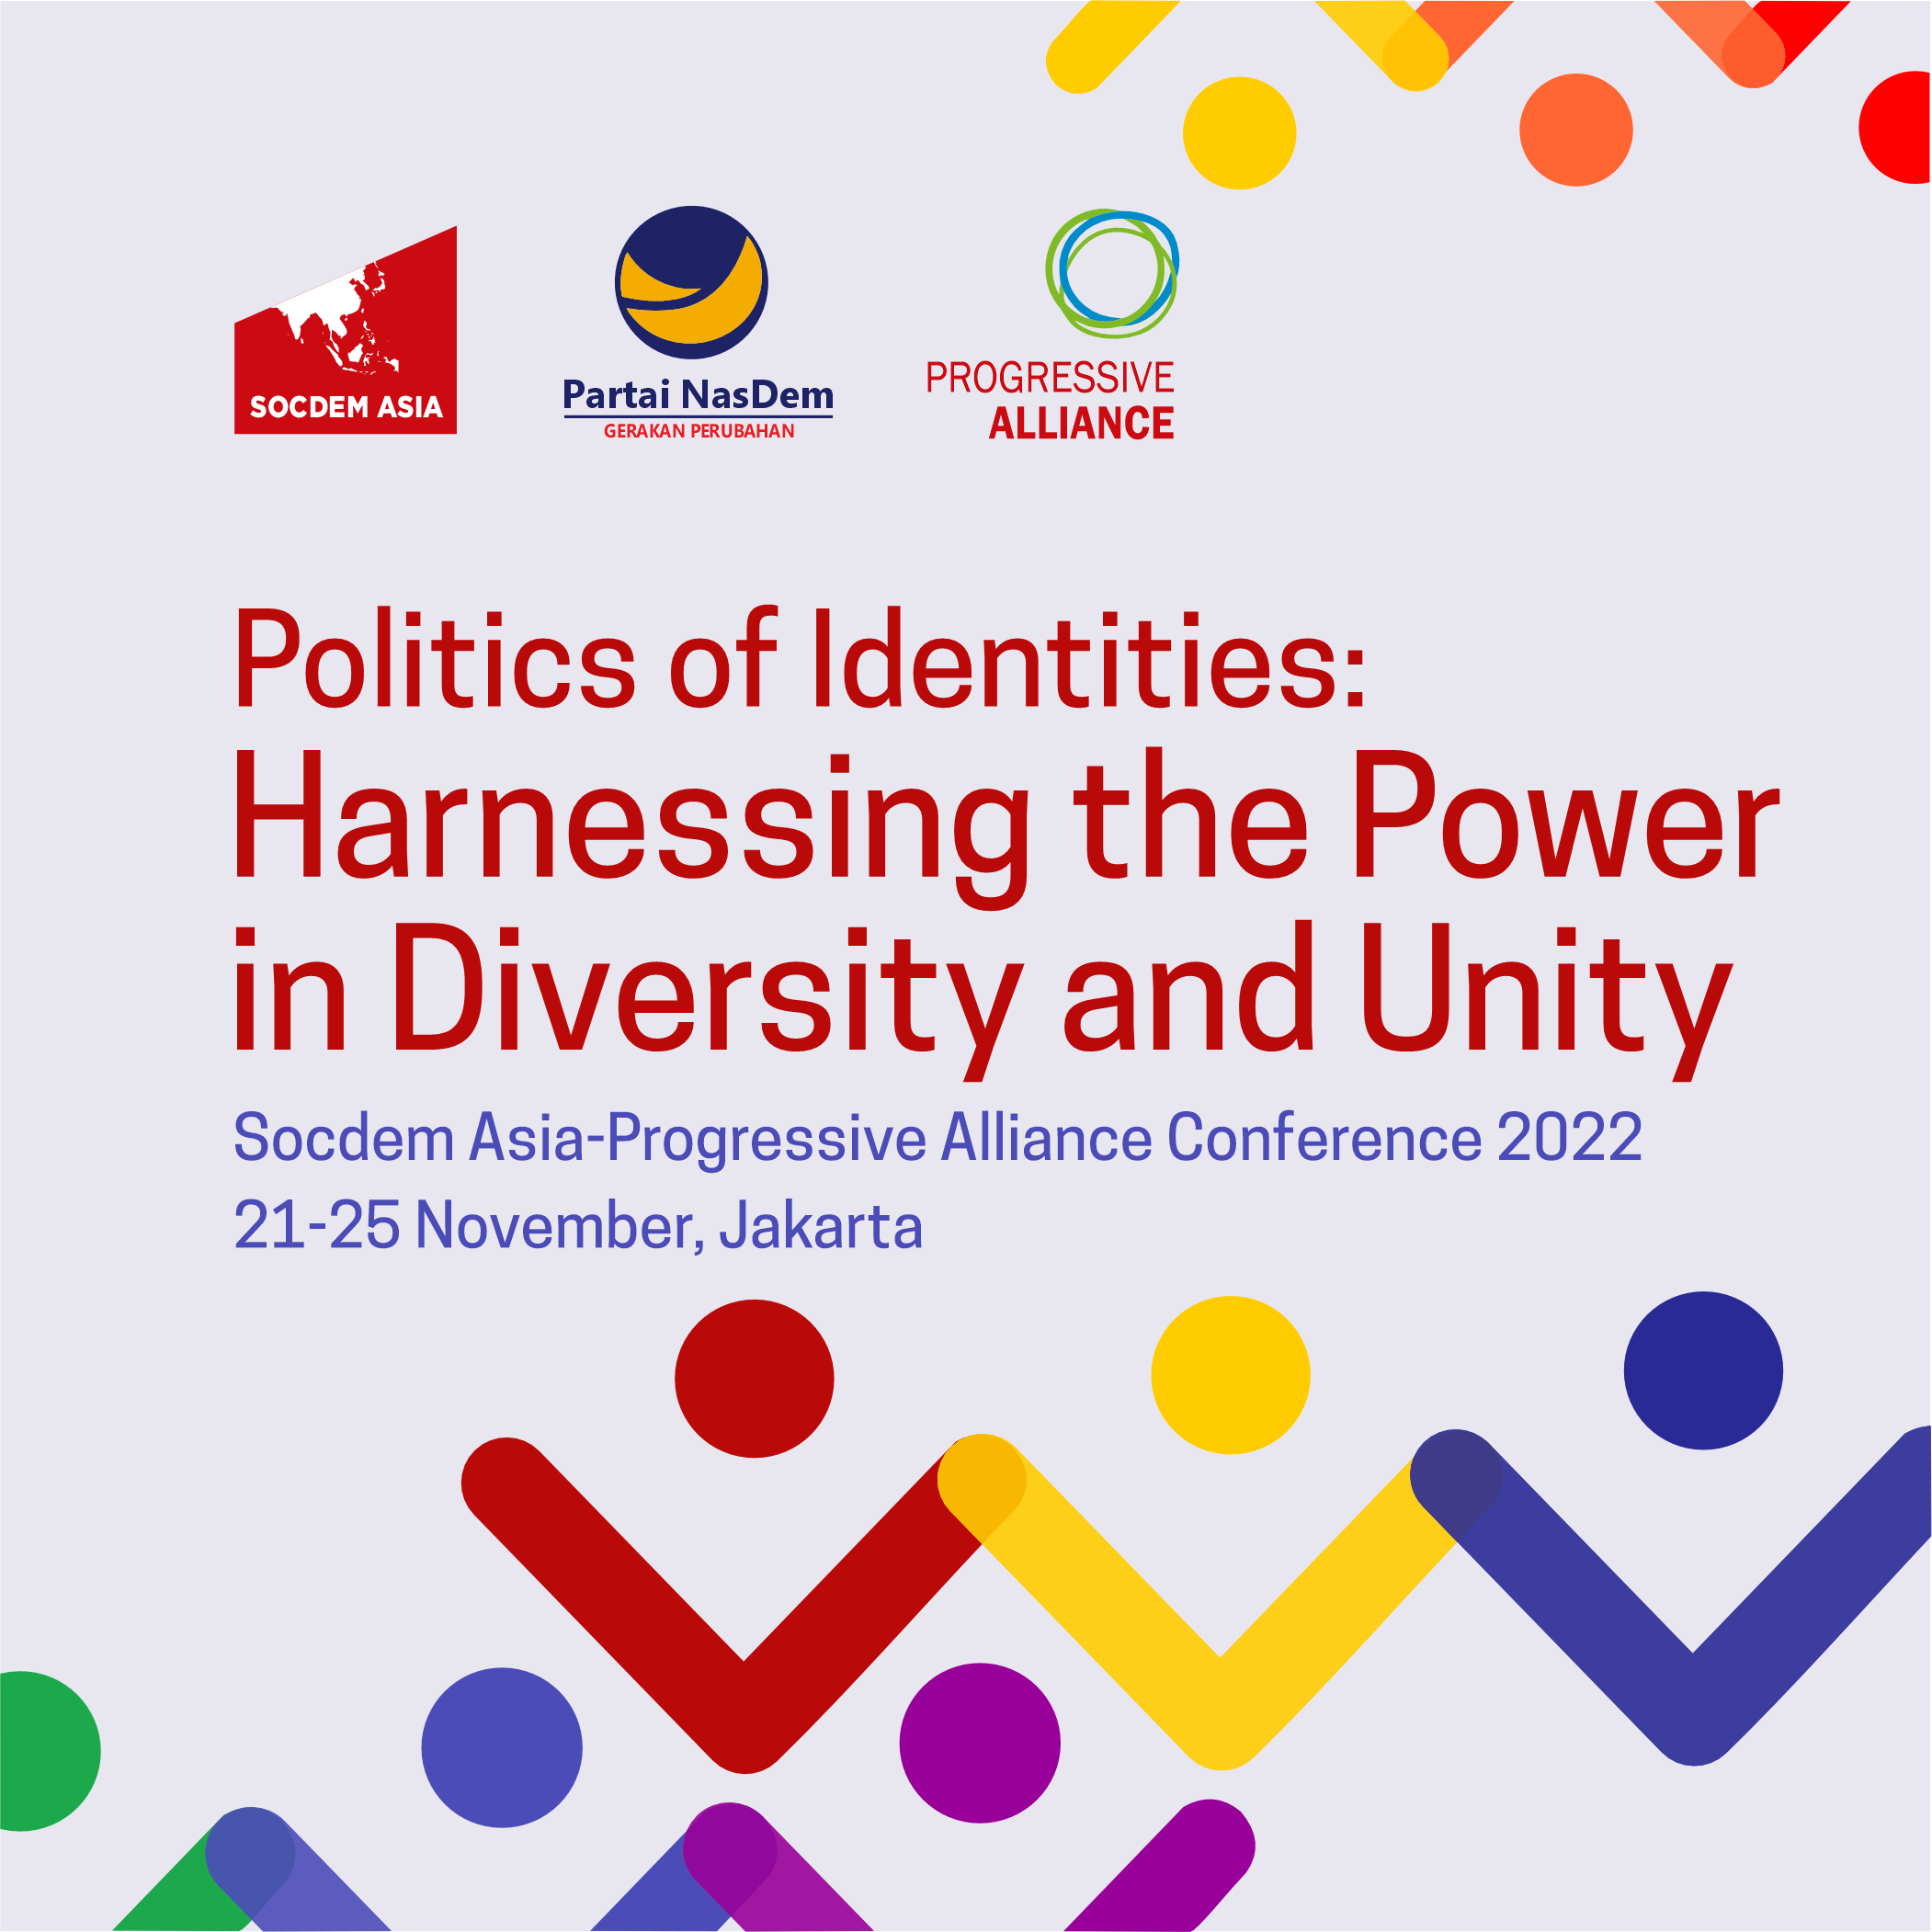 Politics of Identities: Harnessing the Power in Diversity and Unity conference 2022